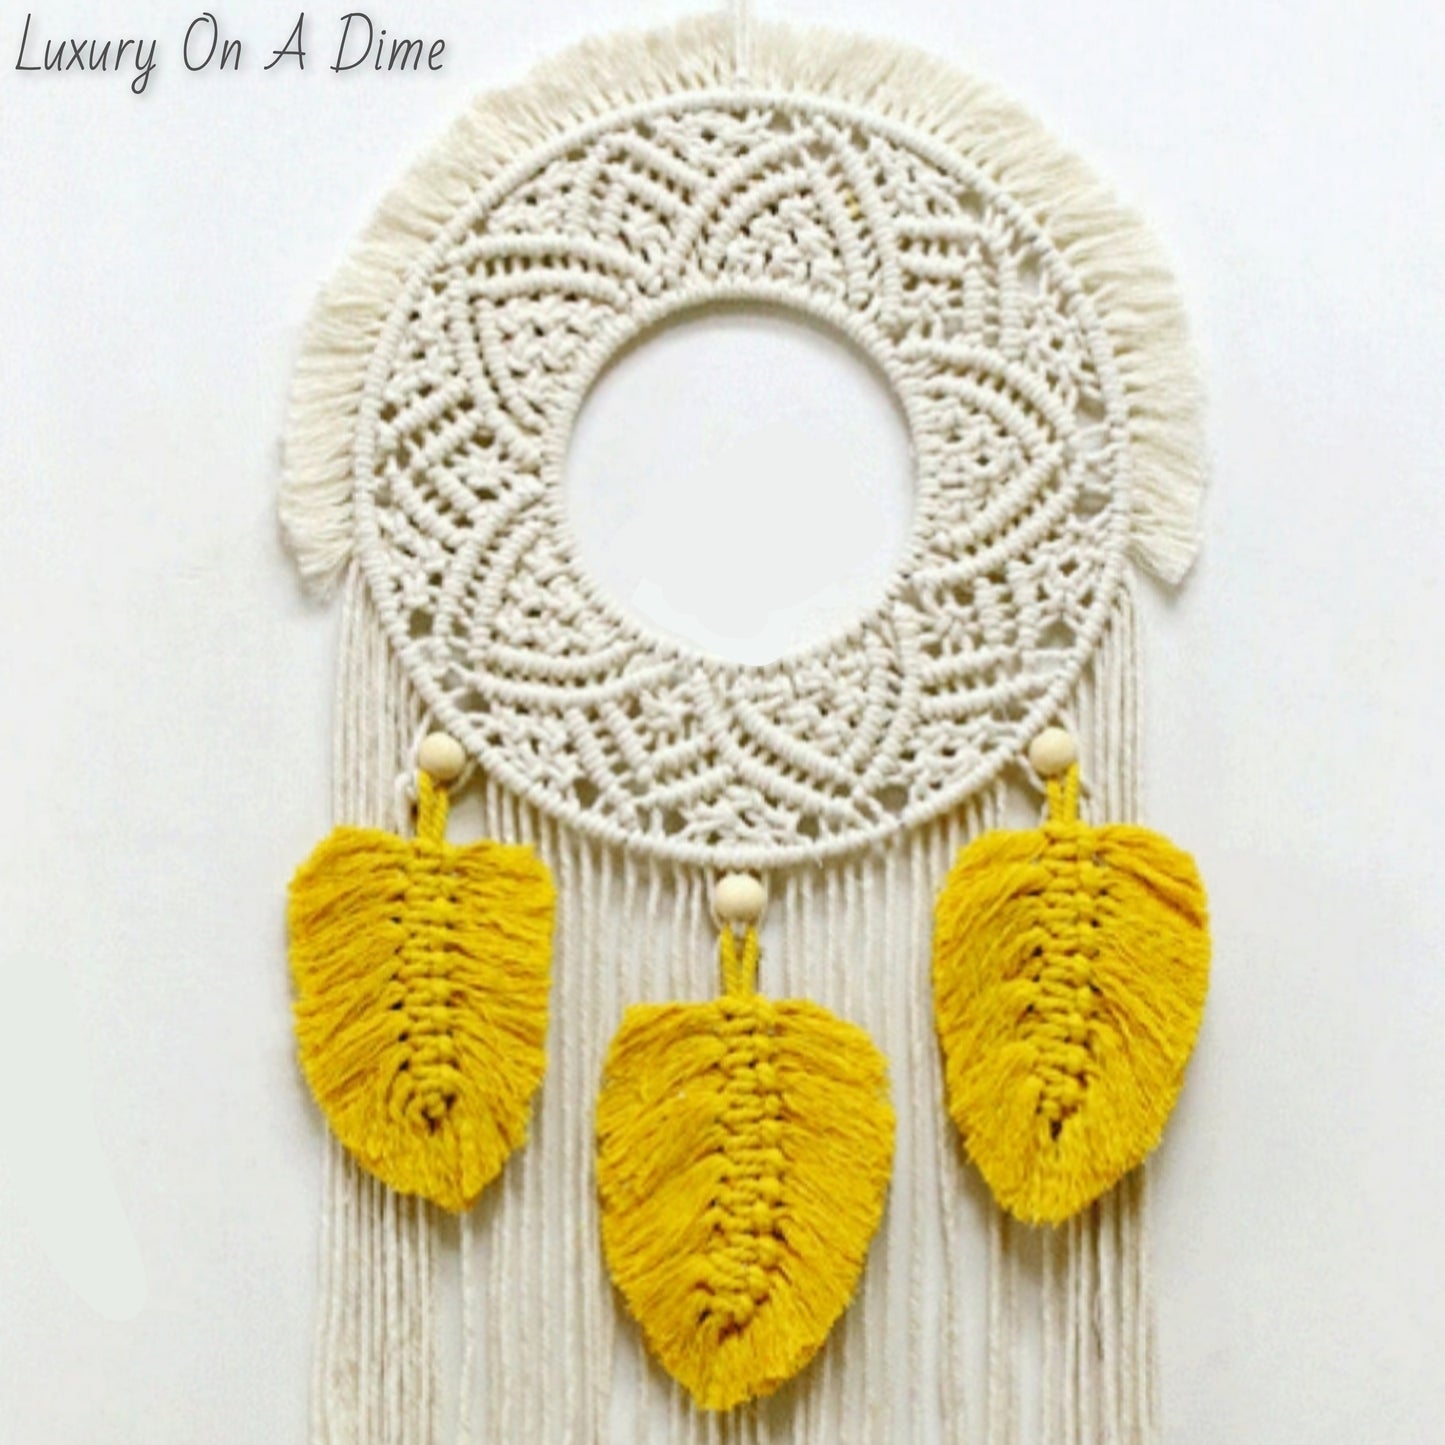 FEATHER Fringe Macrame Wall Hanging Hand-made Bohemian Home Decor Tapestry
(2 colors available)